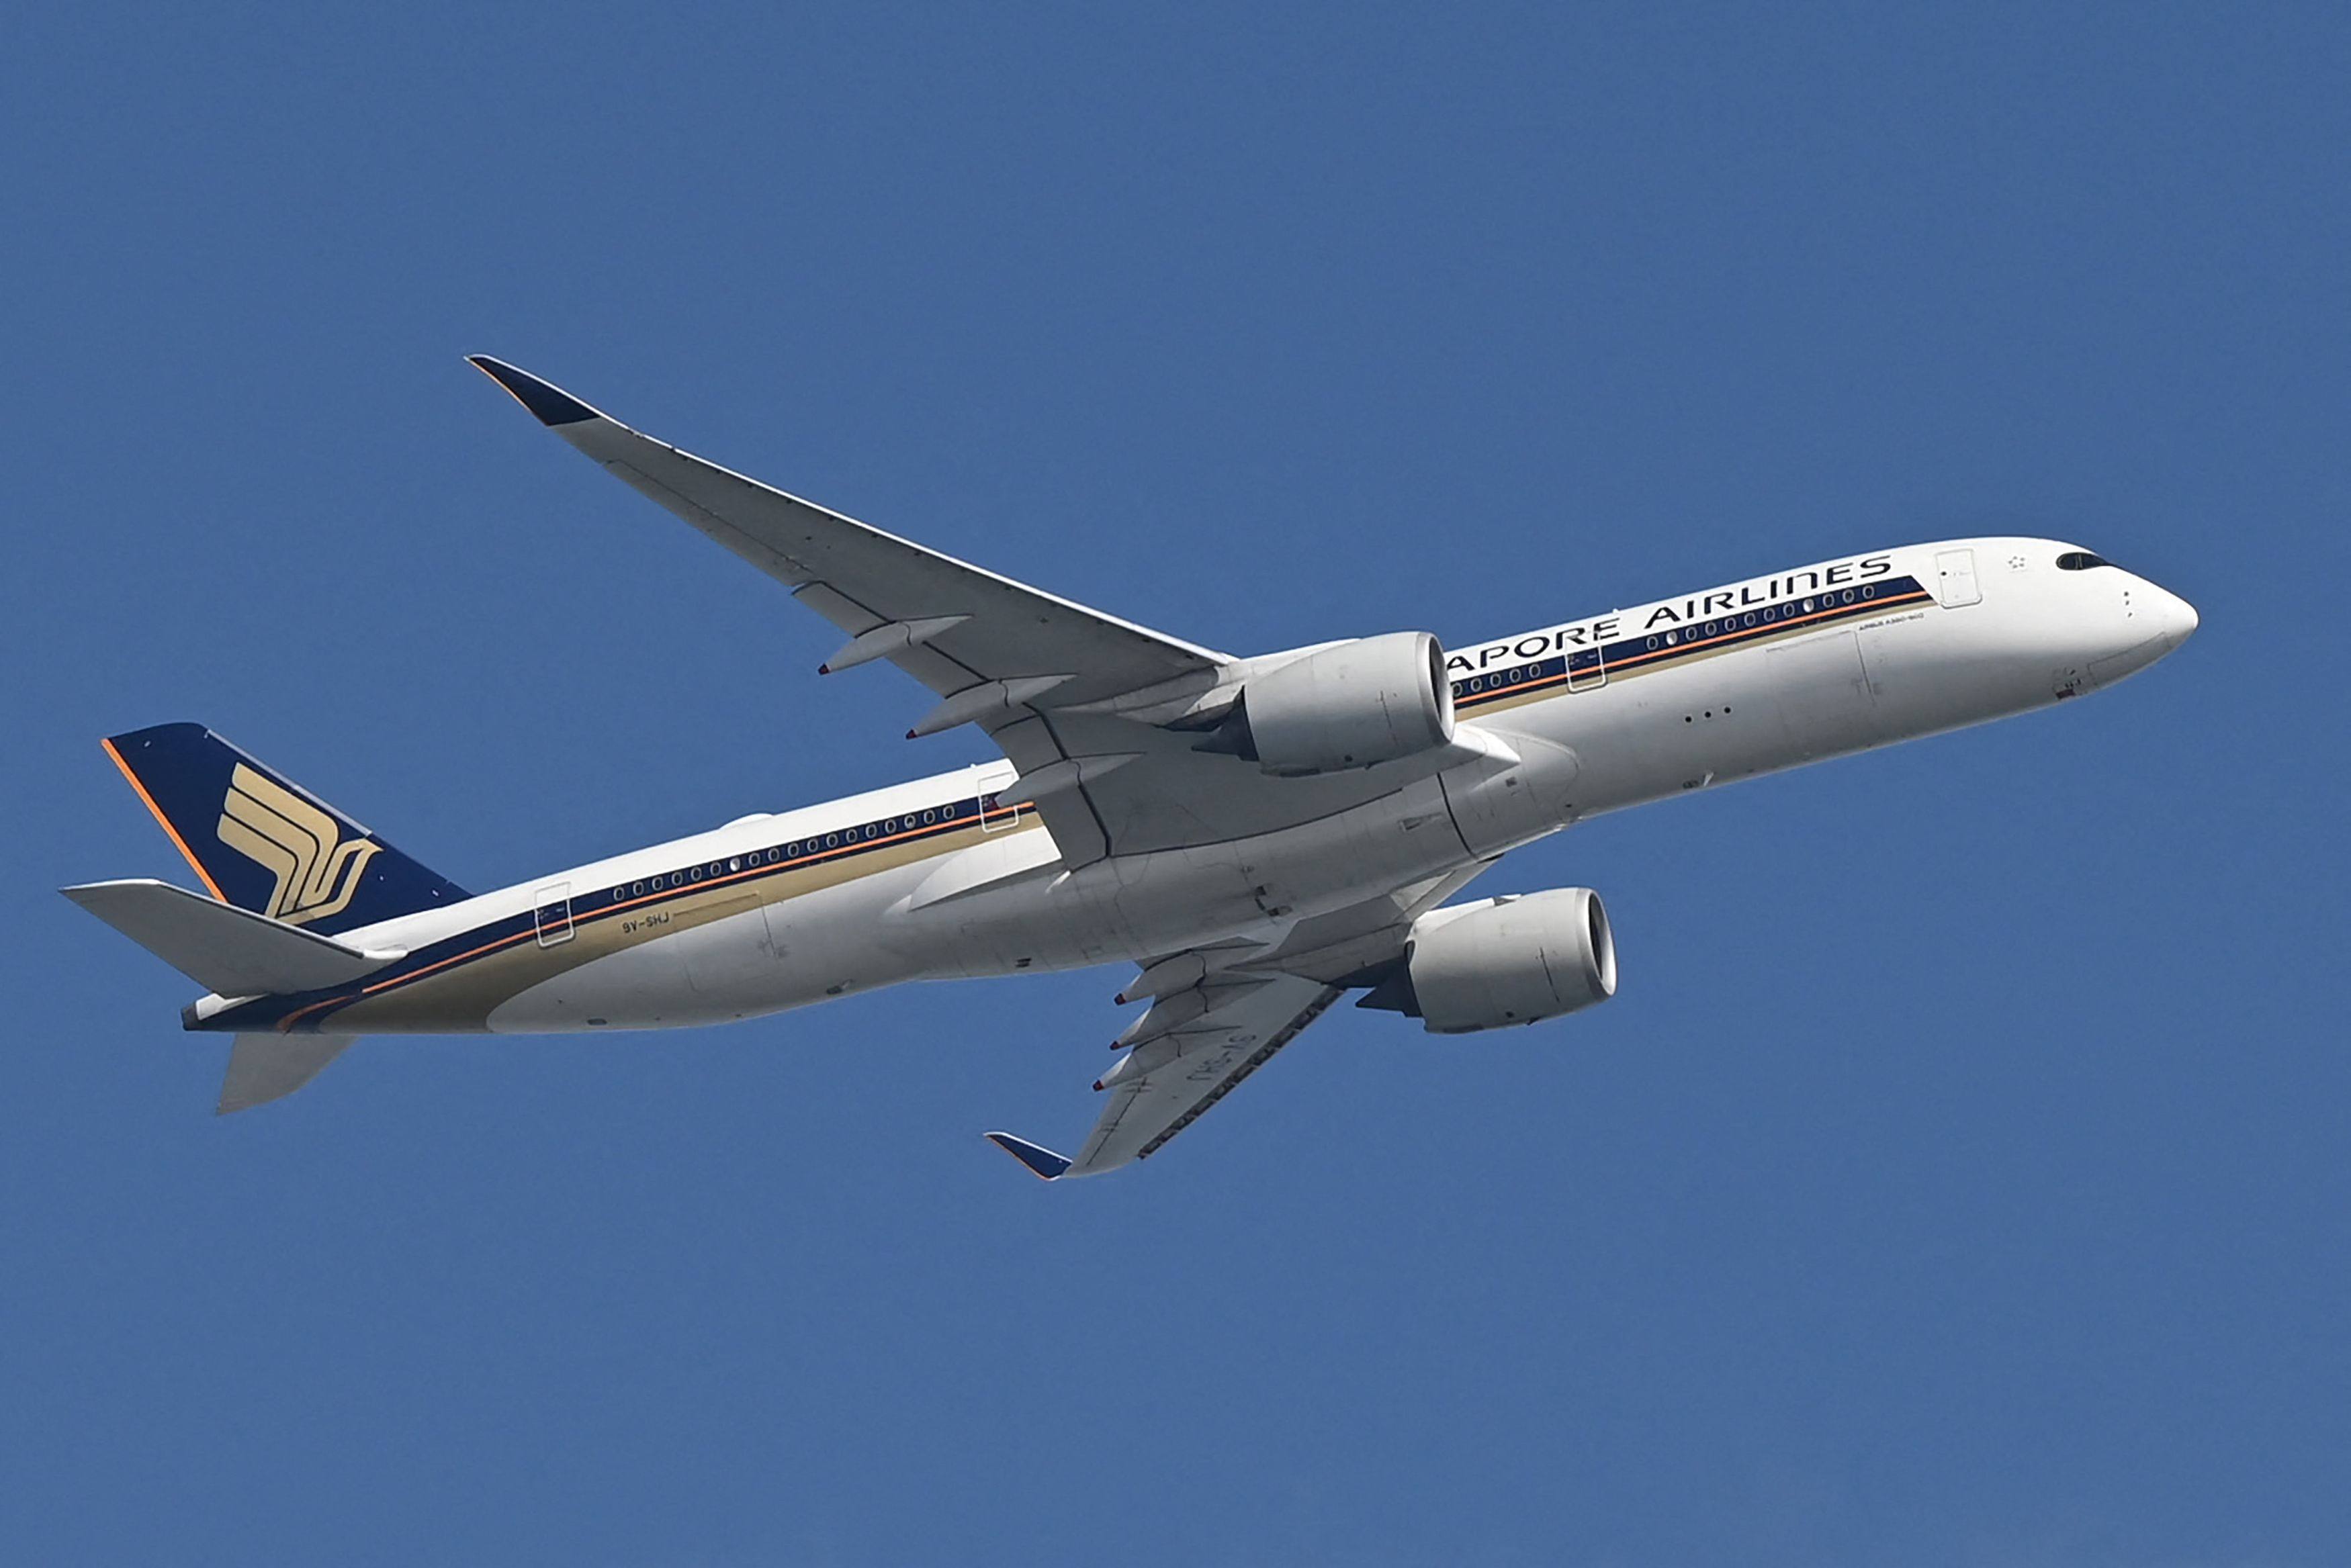 A Singapore Airlines aeroplane flies after take off from Changi Airport in Singapore on February 20. Photo: AFP